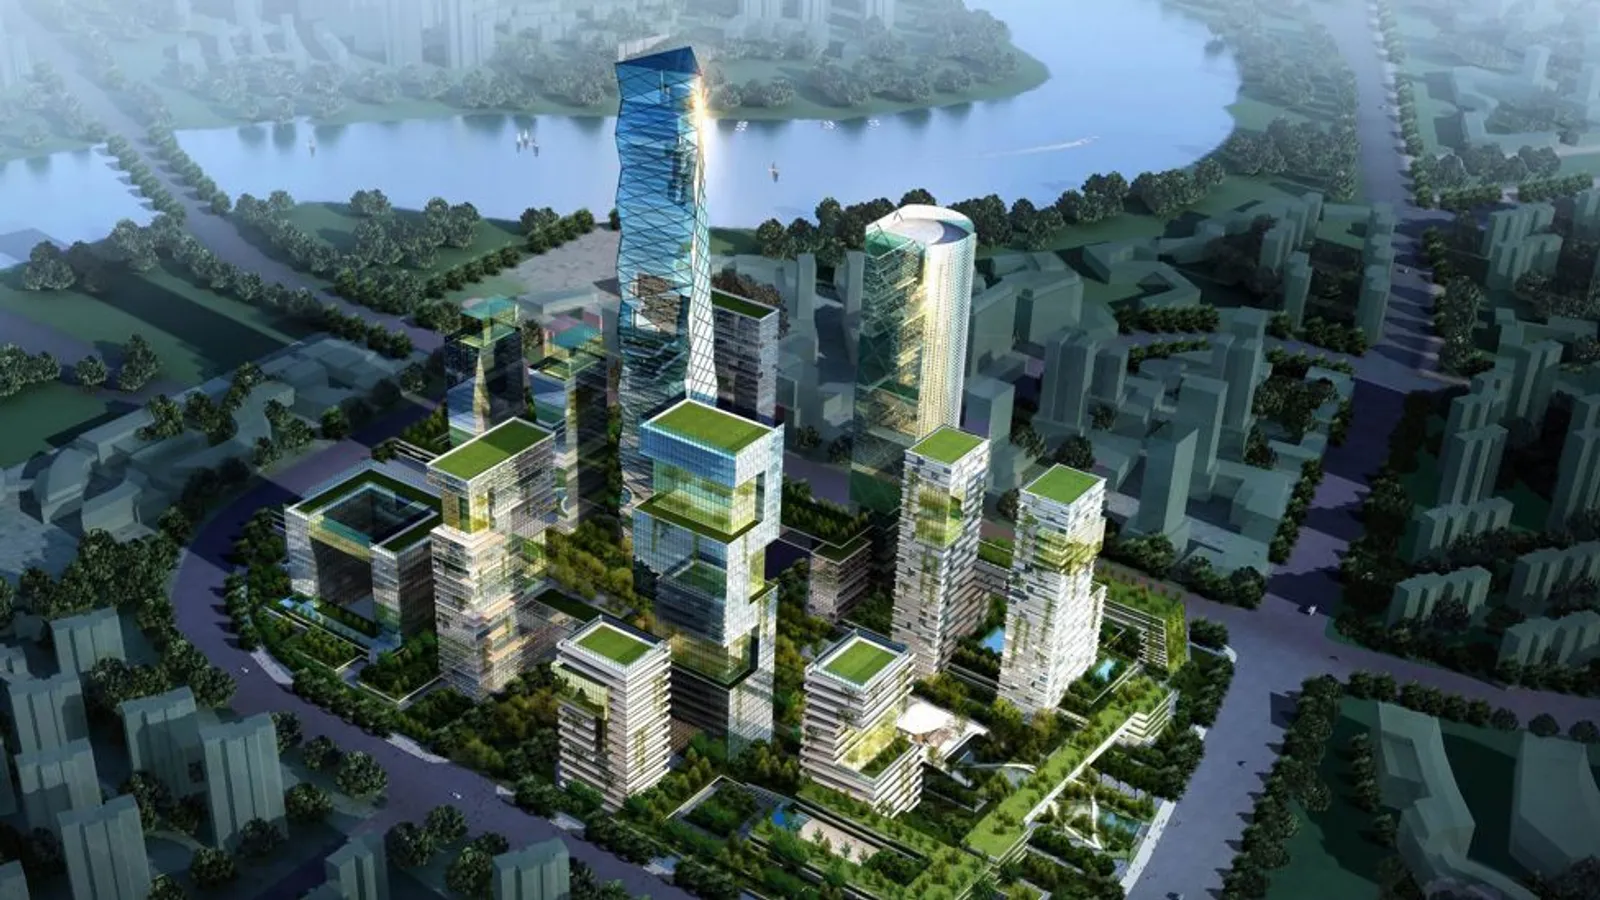  Tianjin Eco-city; sustainable cities in China